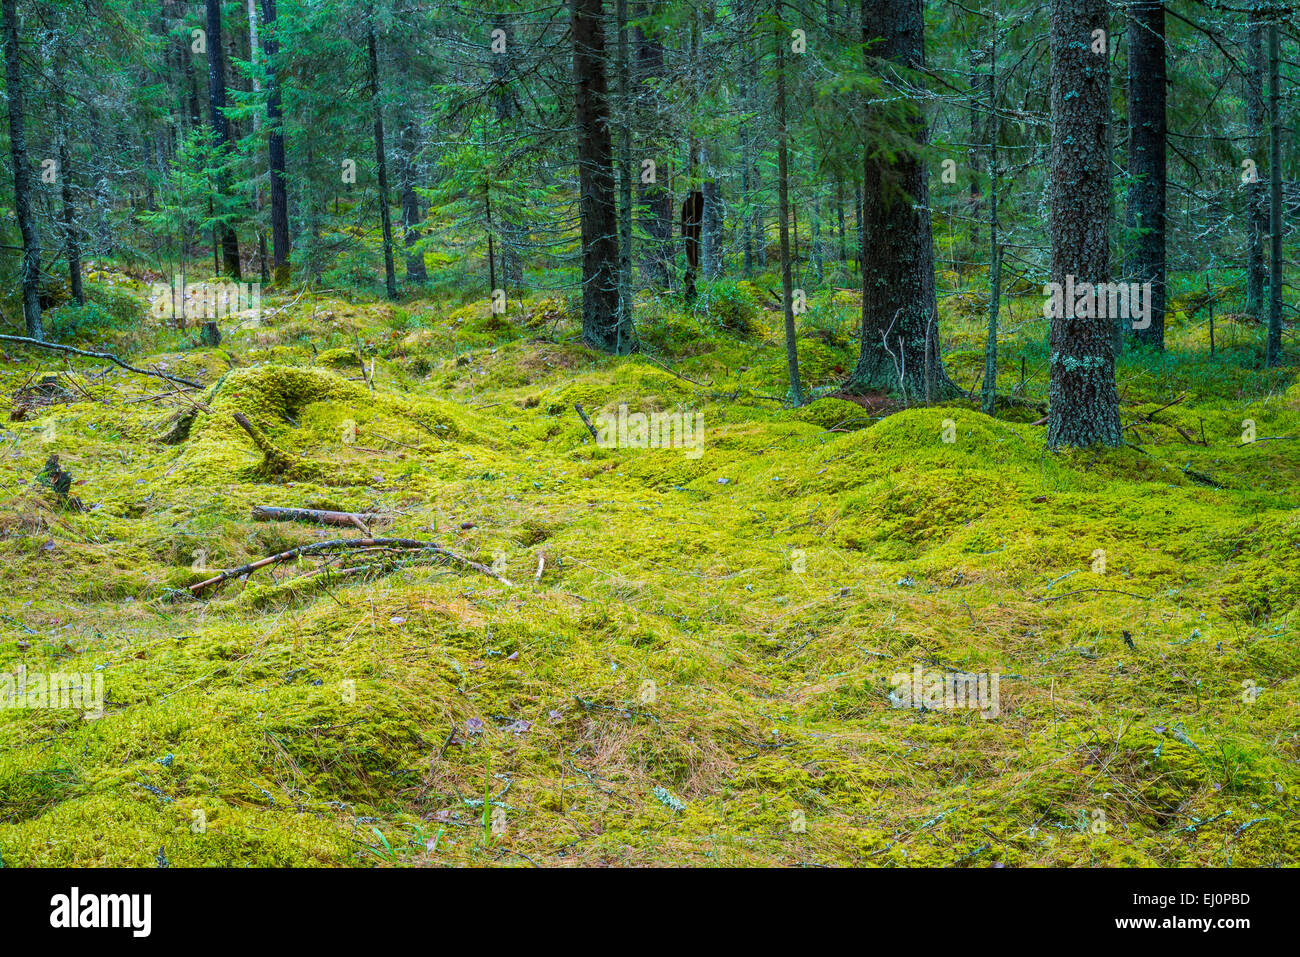 Mossy forest landscape in Finland Stock Photo